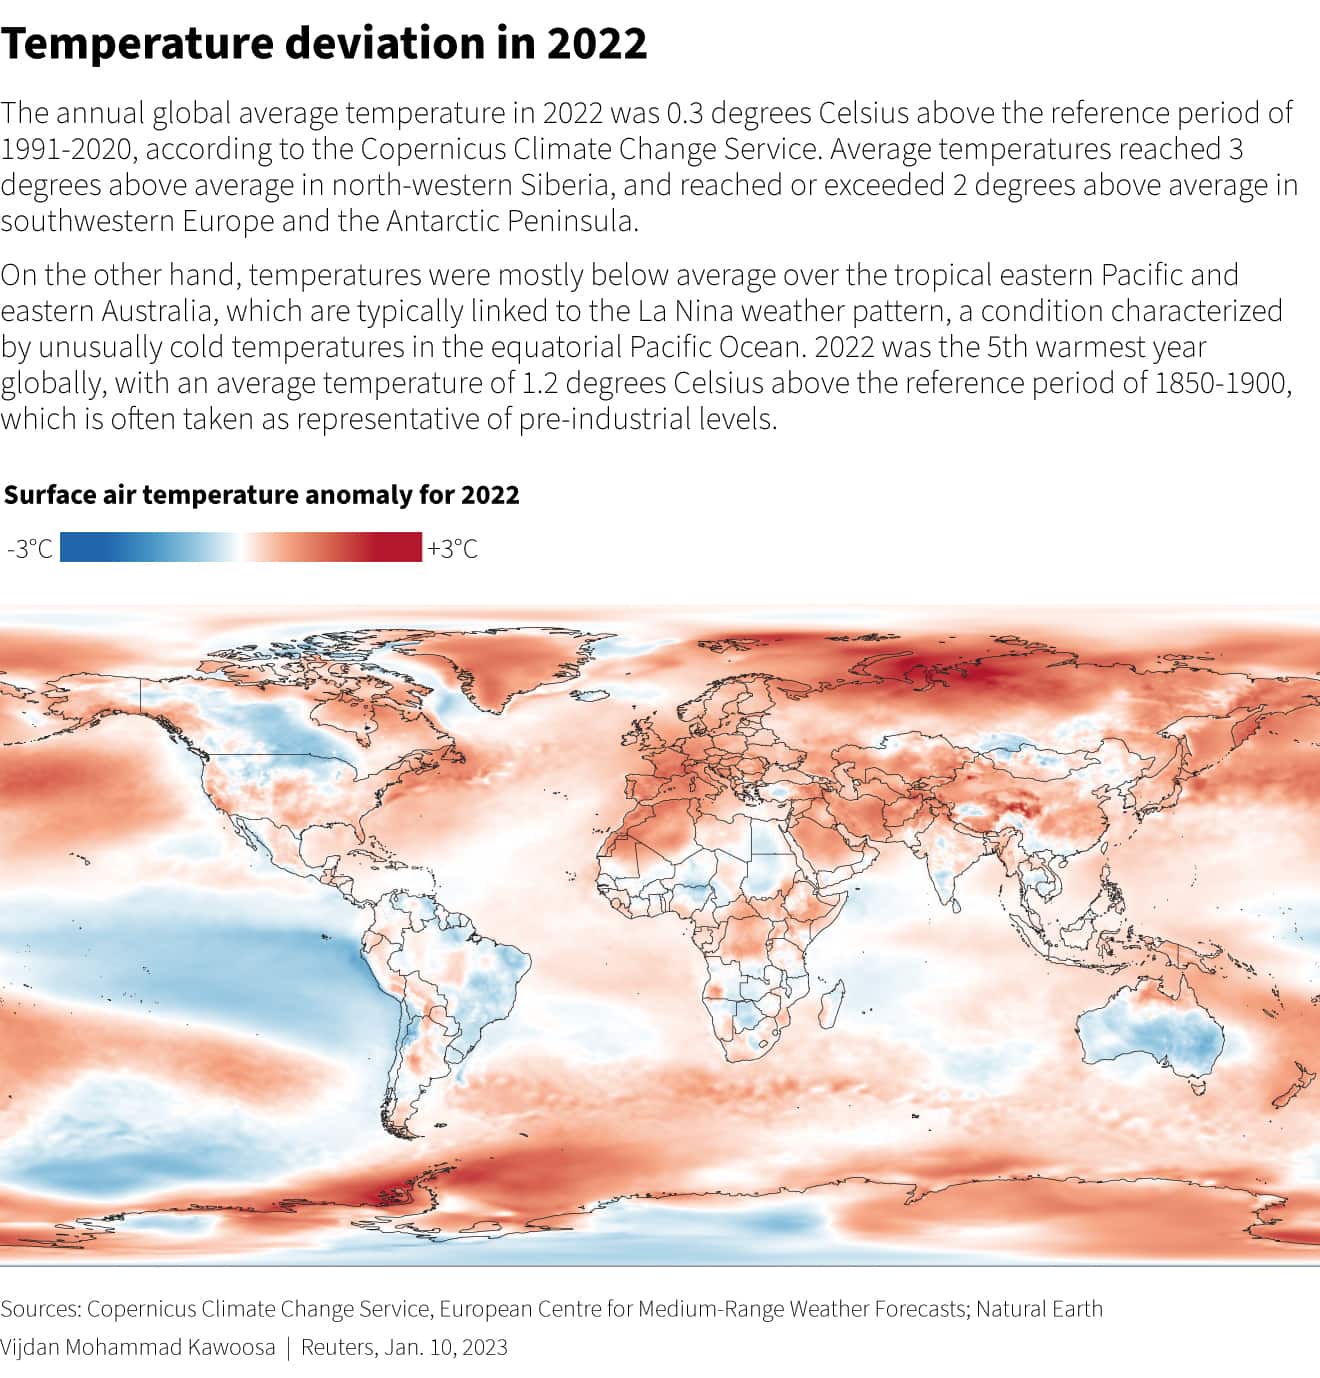 The European Union's Copernicus Climate Change Service shares its findings on the global climate for 2022 The annual global average temperature in 2022 was 0.3 degrees Celsius above the reference period of 1991-2020.